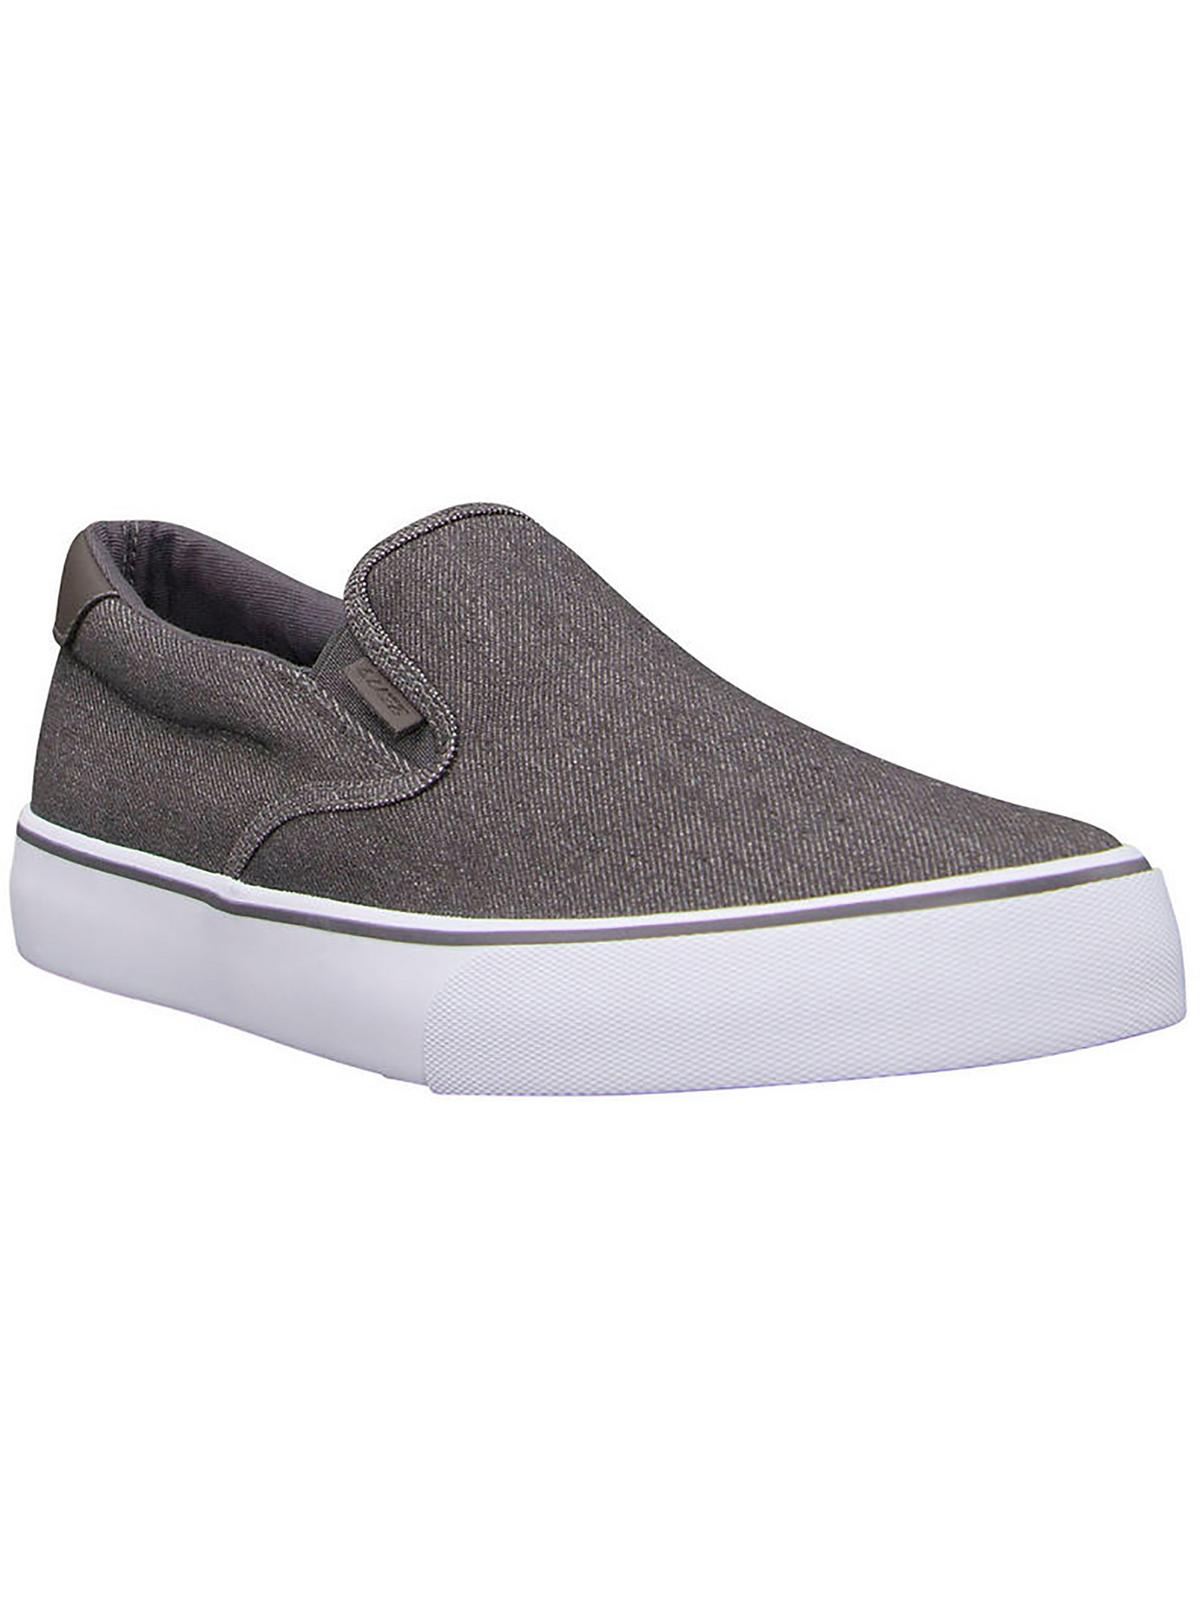 Lugz Clipper Denim Mens Fitness Lifestyle Skate Shoes In Gray